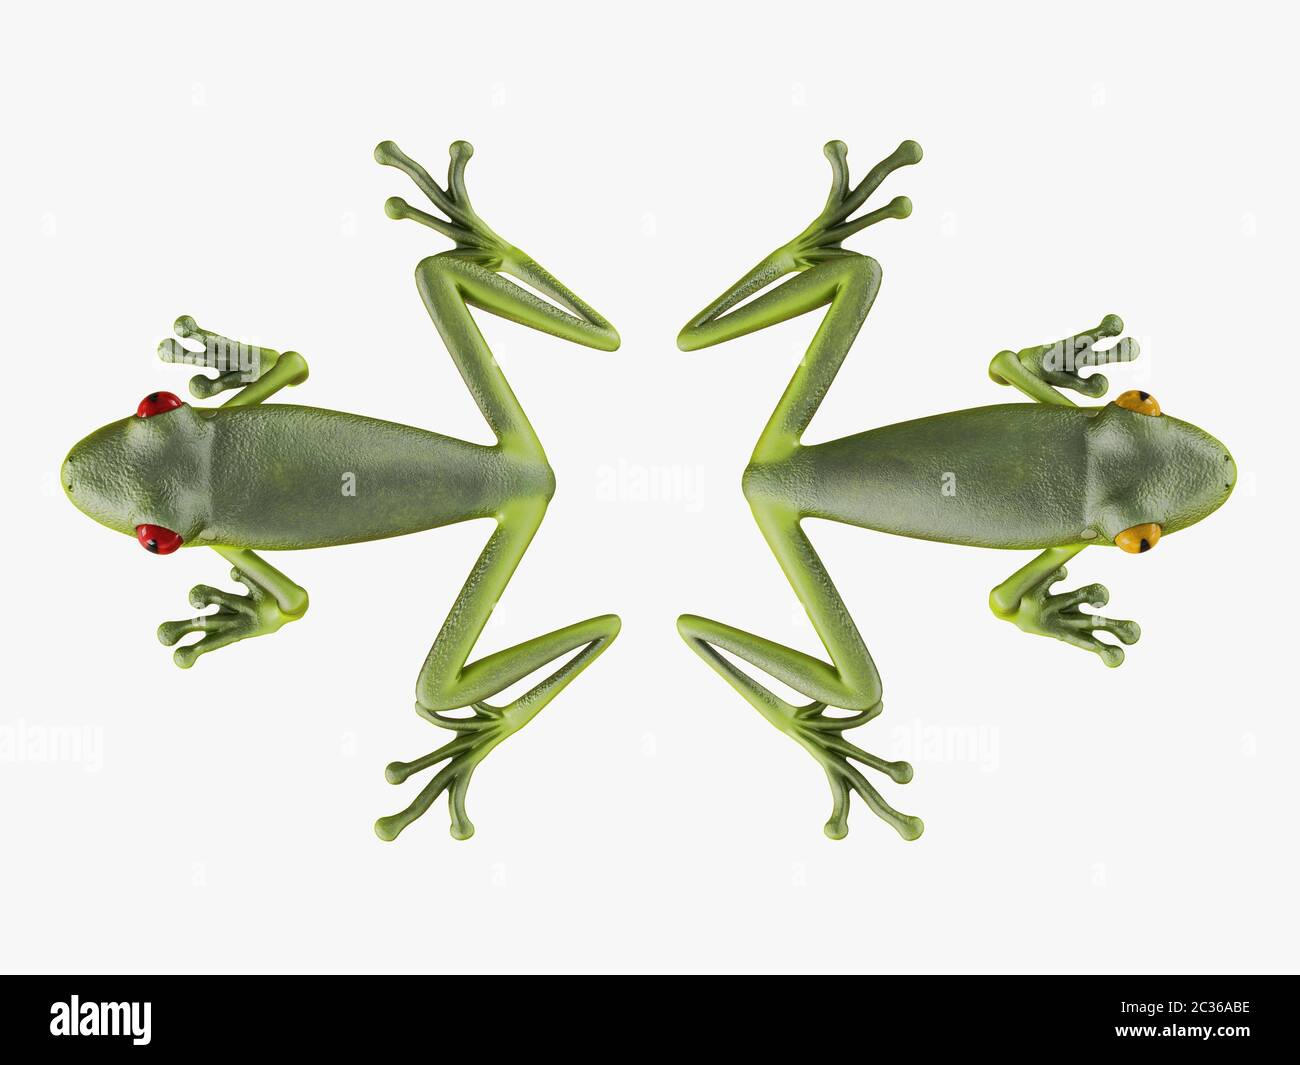 Very small frogs Cut Out Stock Images & Pictures - Alamy